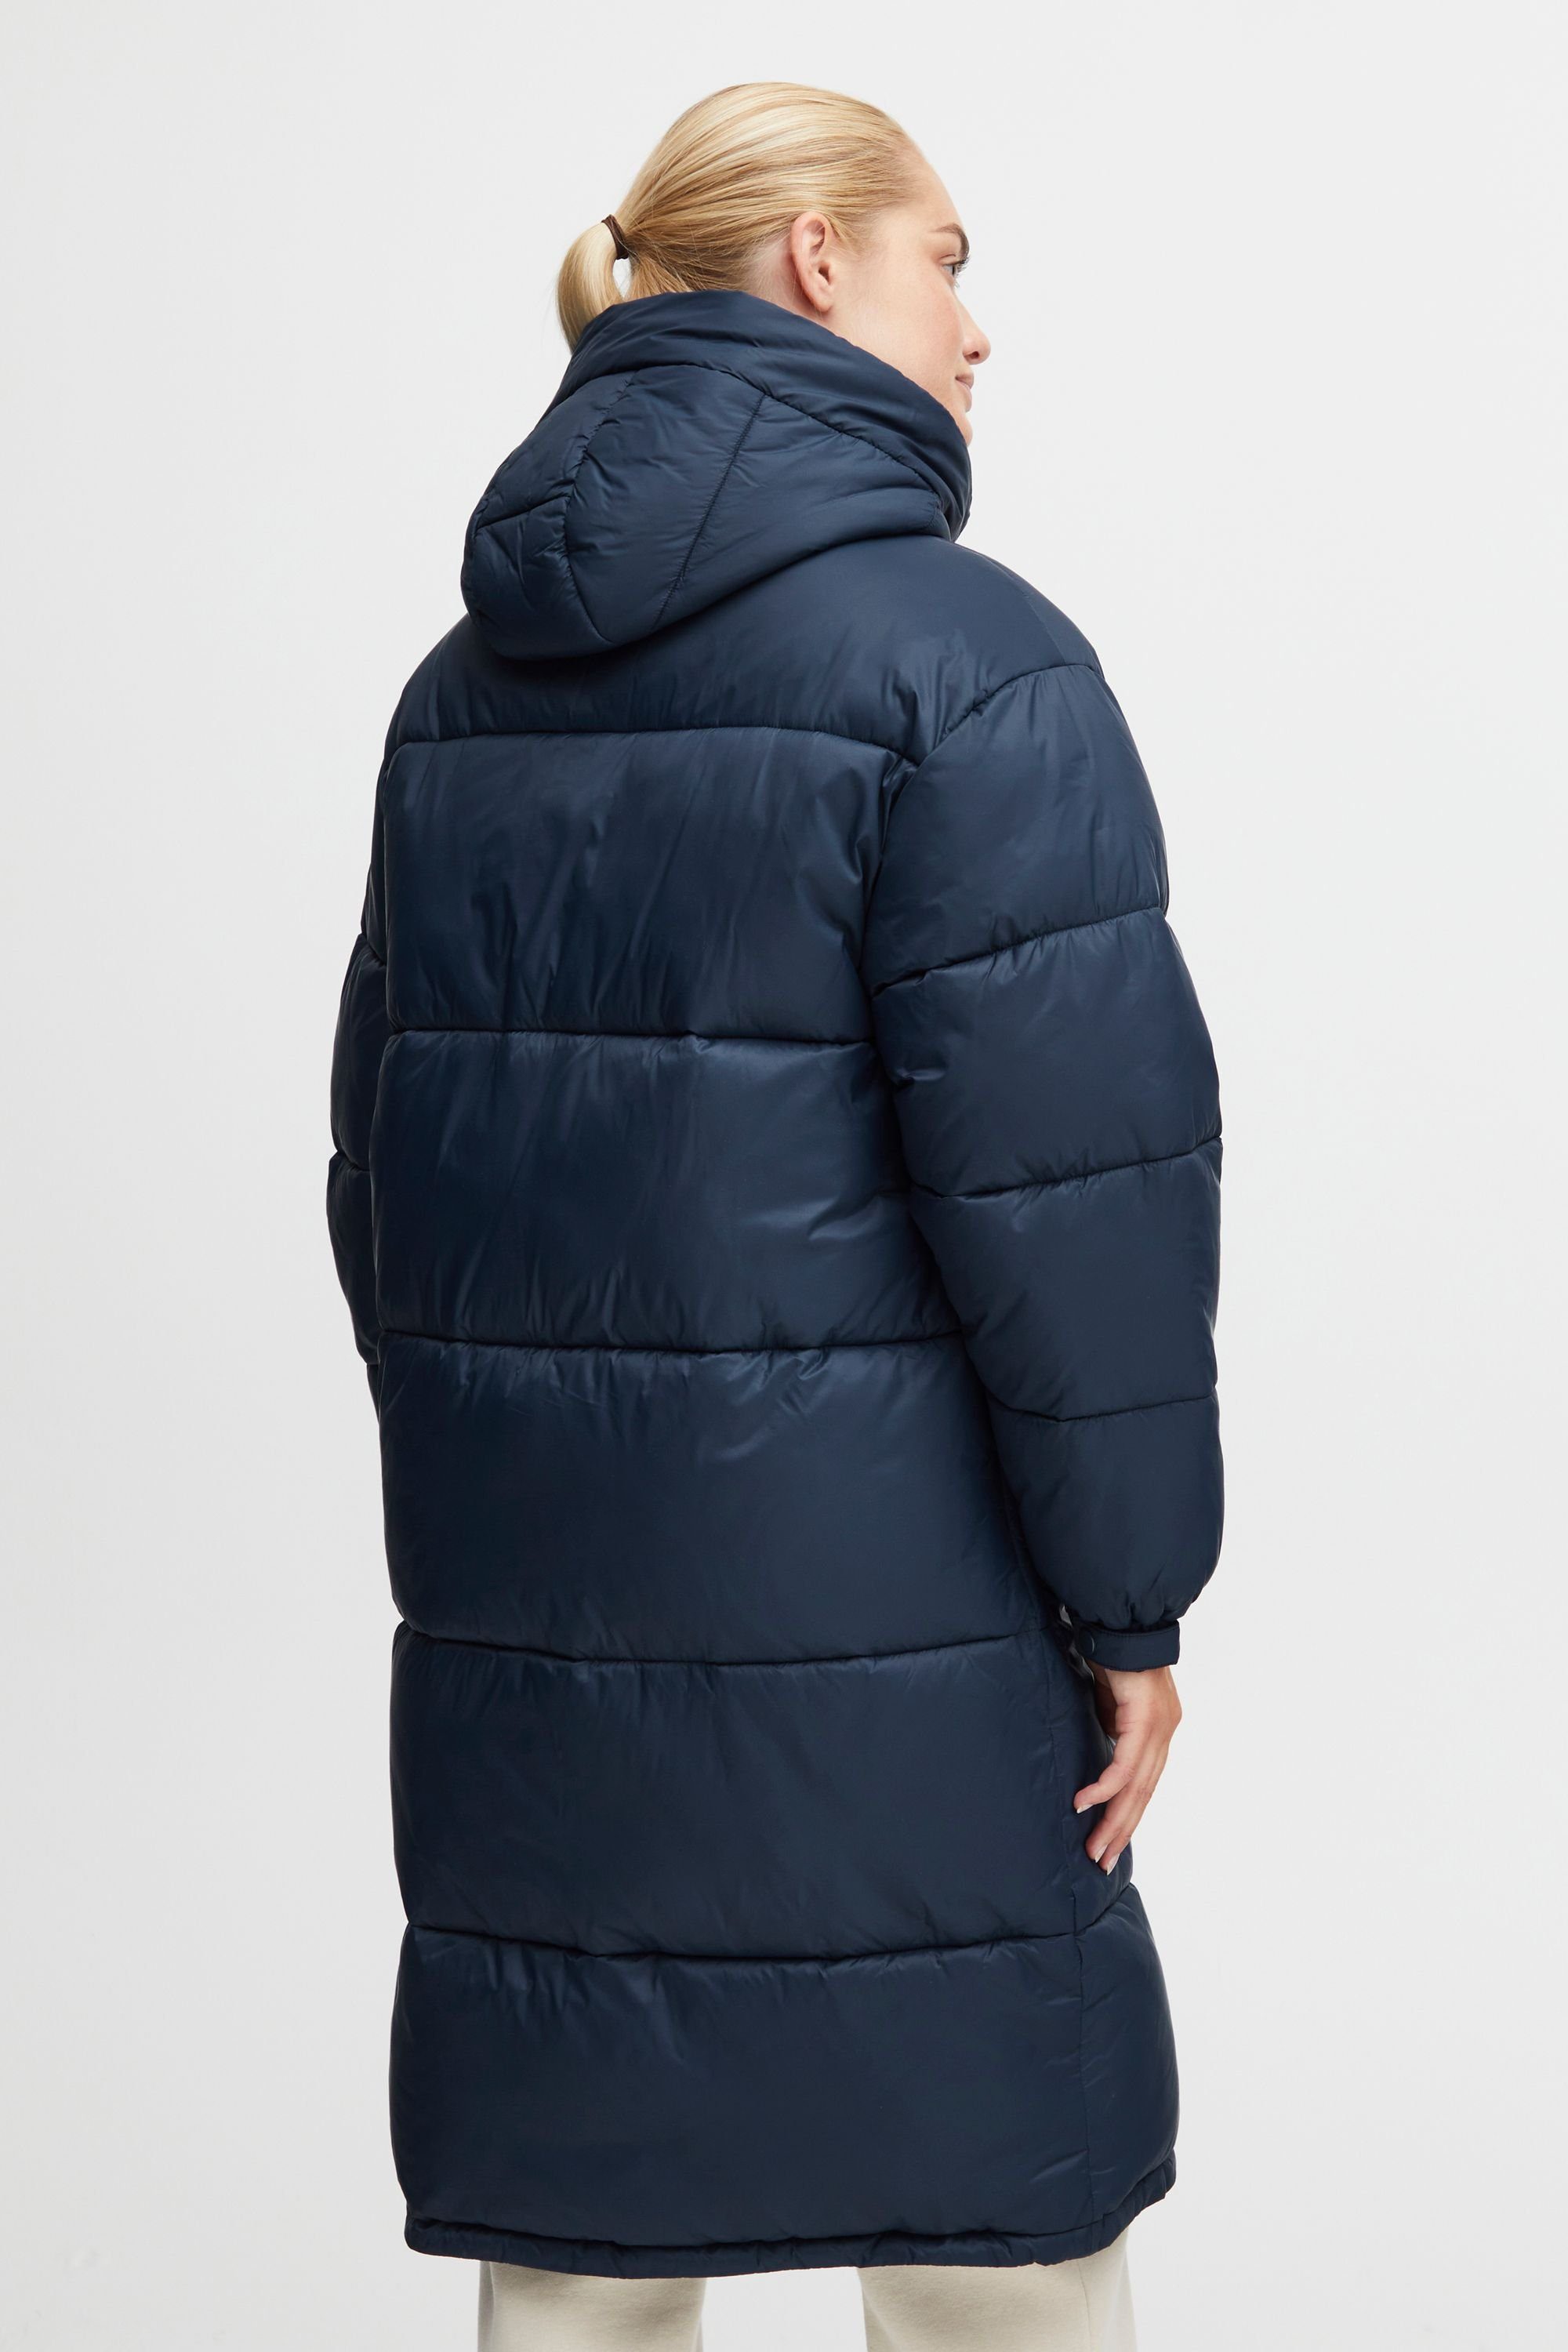 (194010) Parka OXMO OXJolyn Total Eclipse